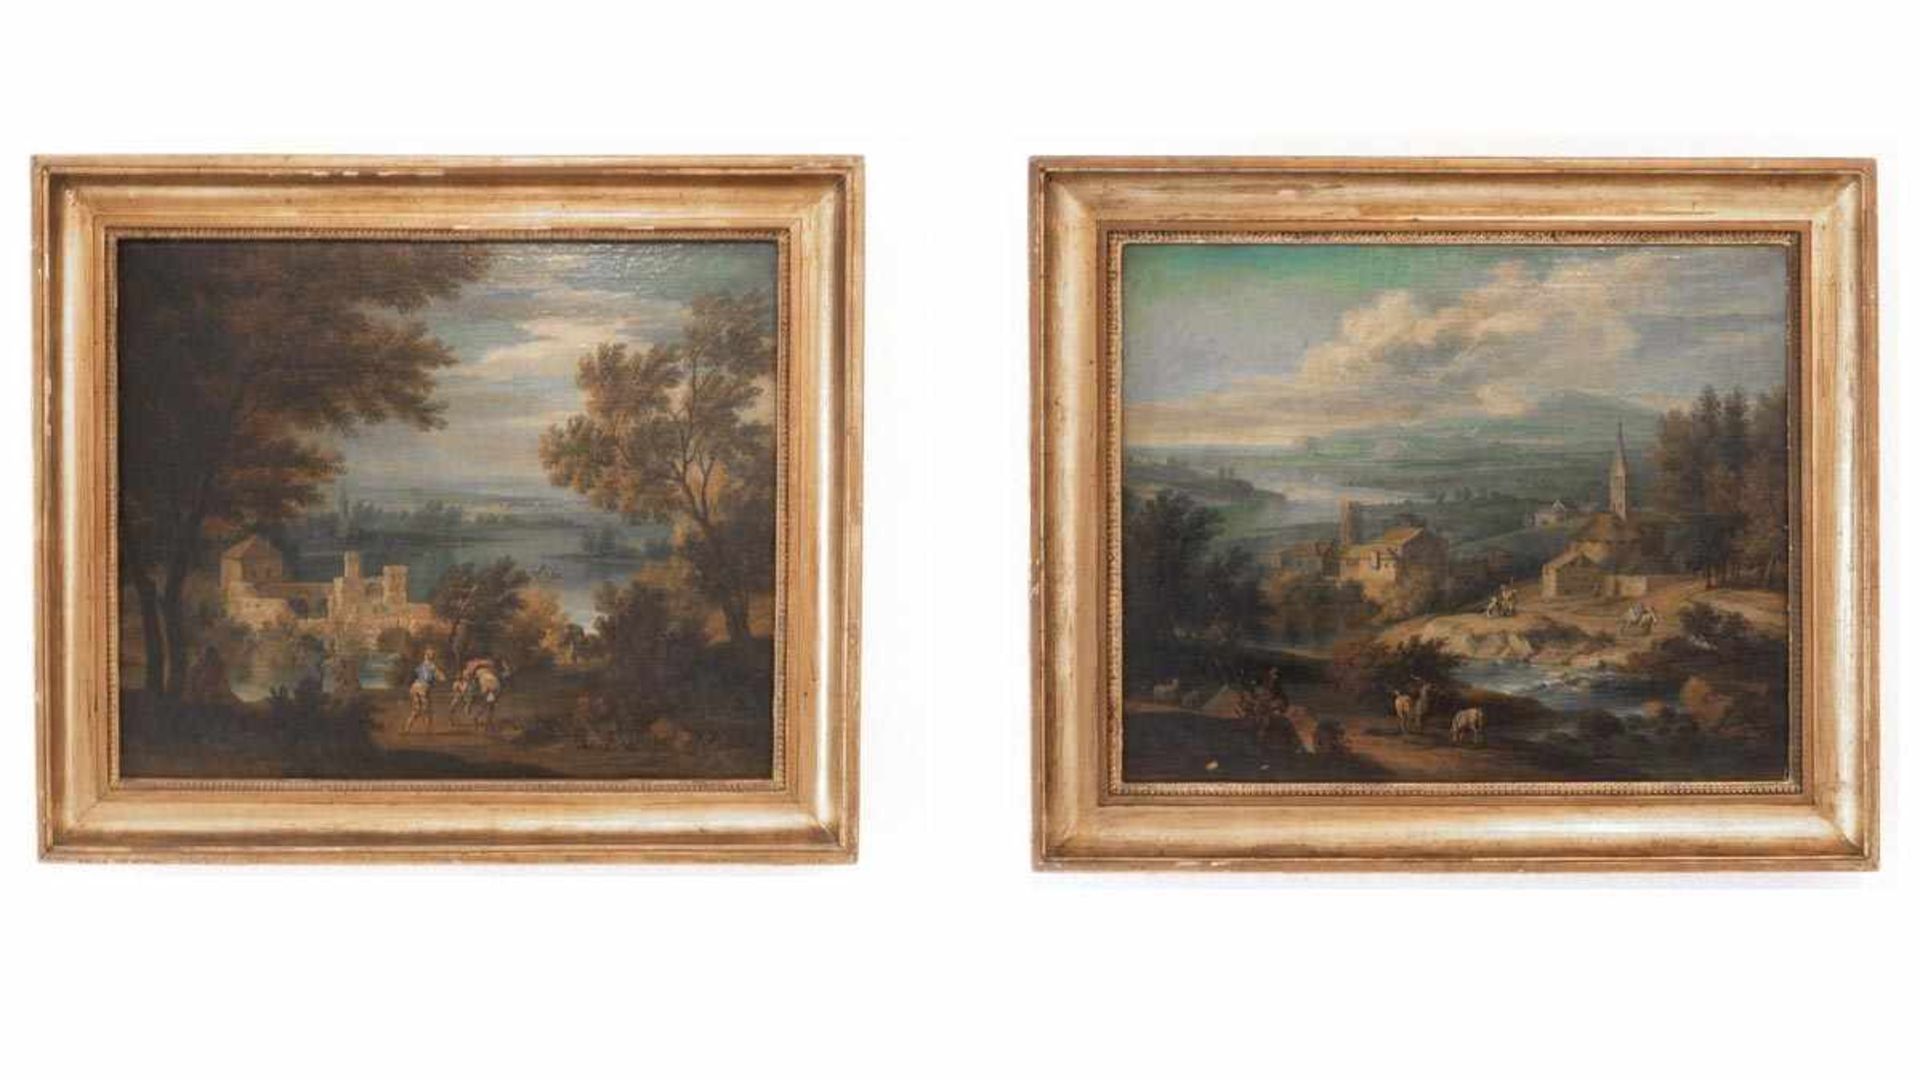 Pair of landscape paintings, old master